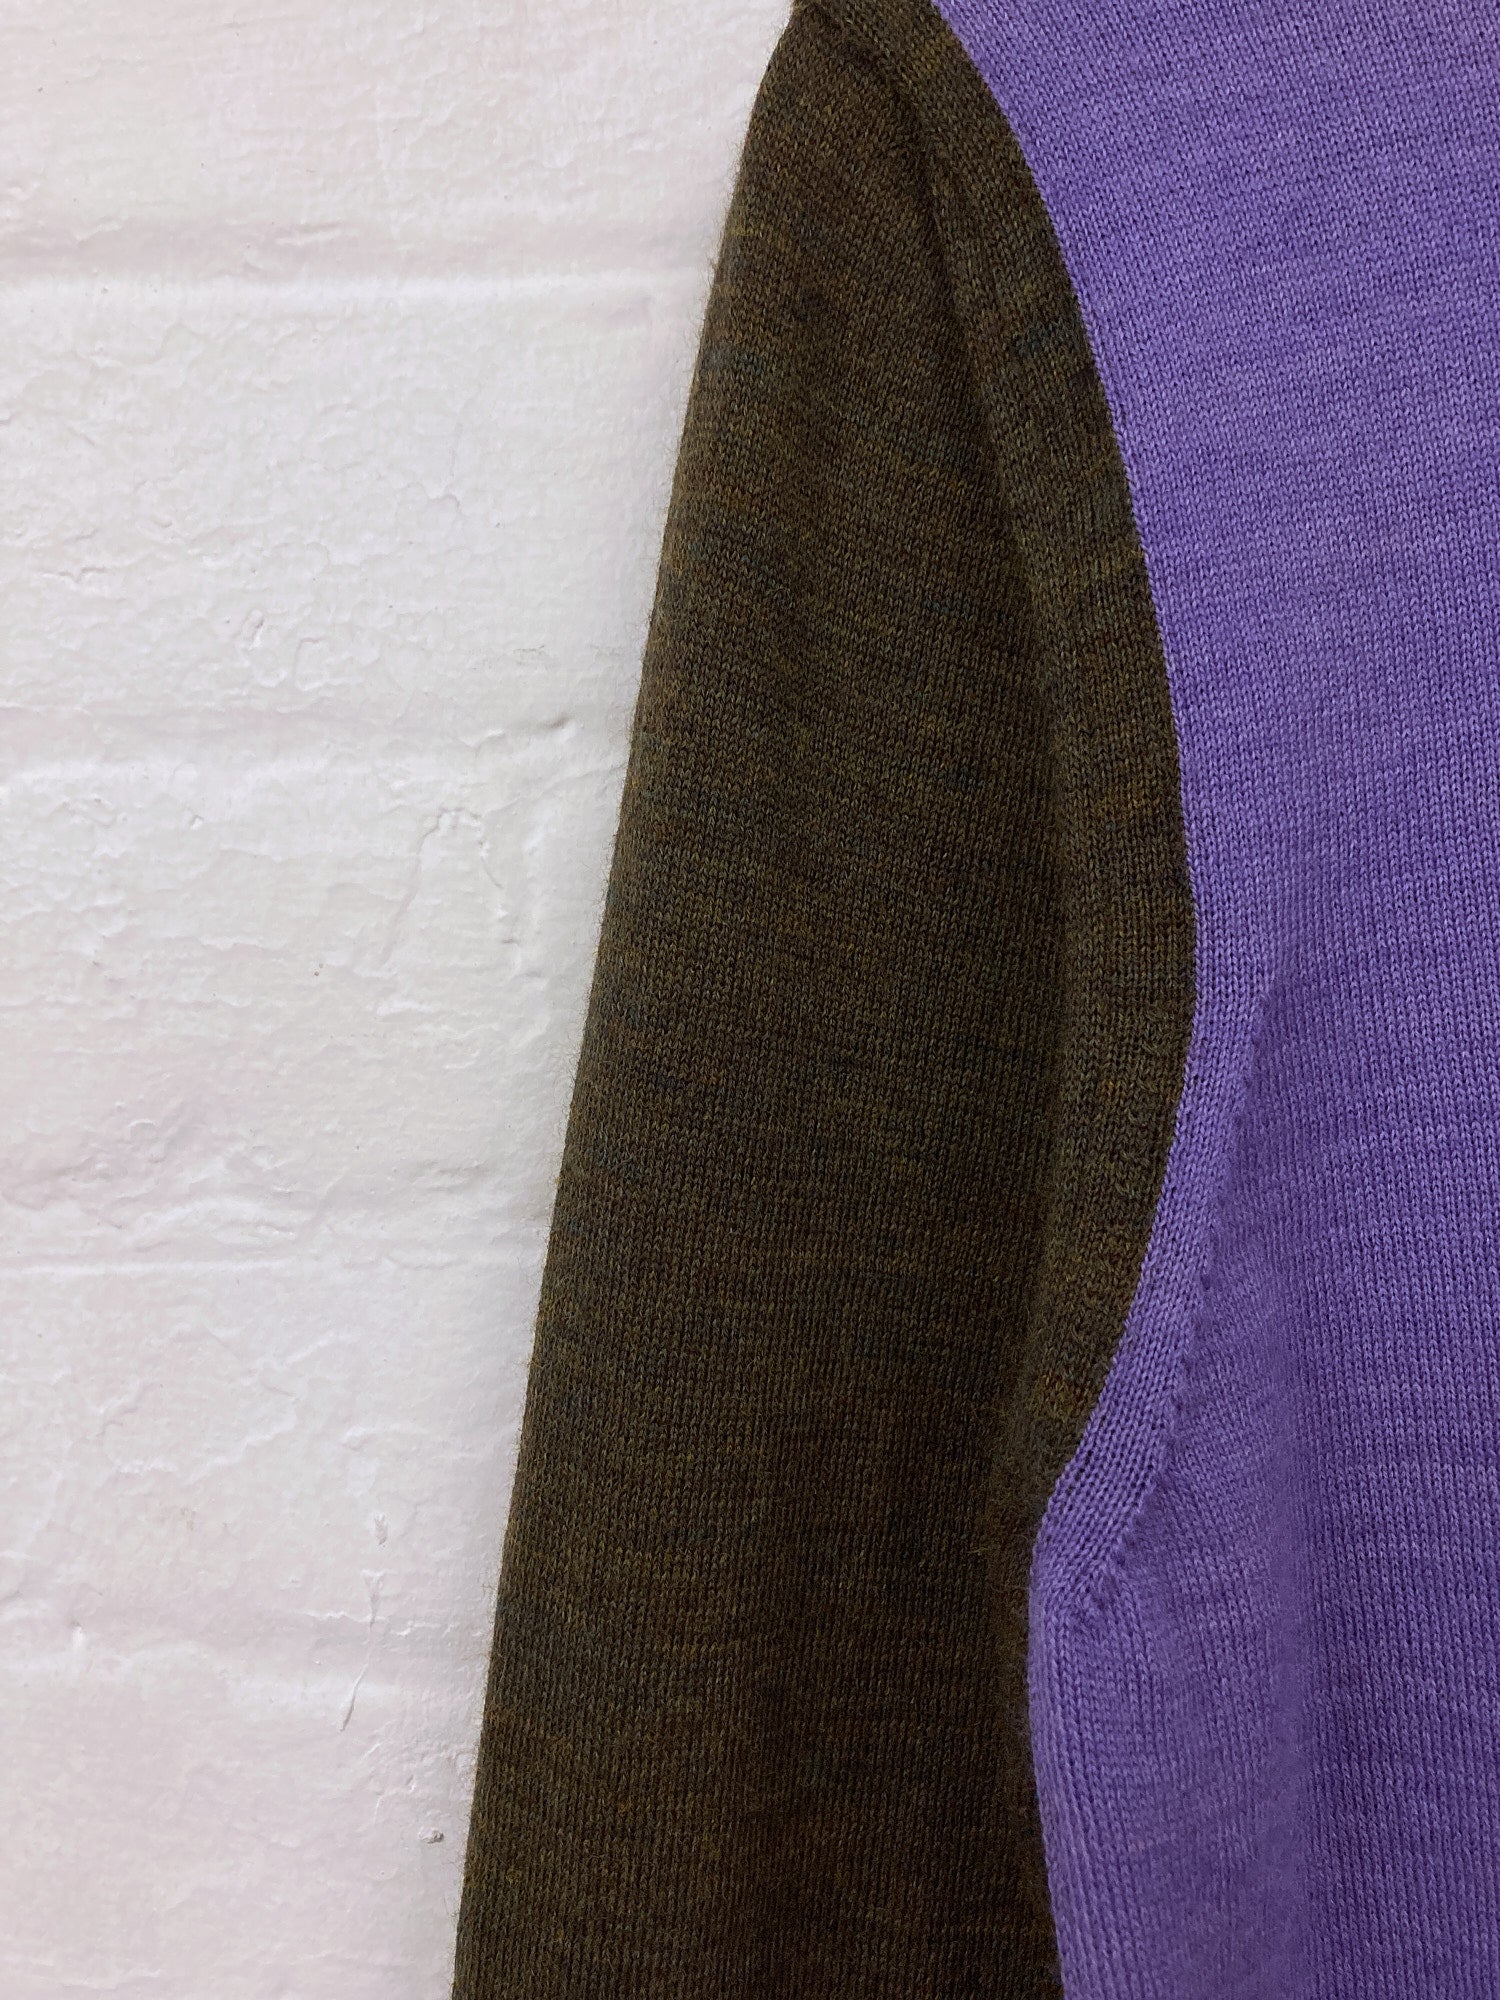 Comme des Garcons Homme Plus AW2009 purple brown wool fake layered turtleneck S